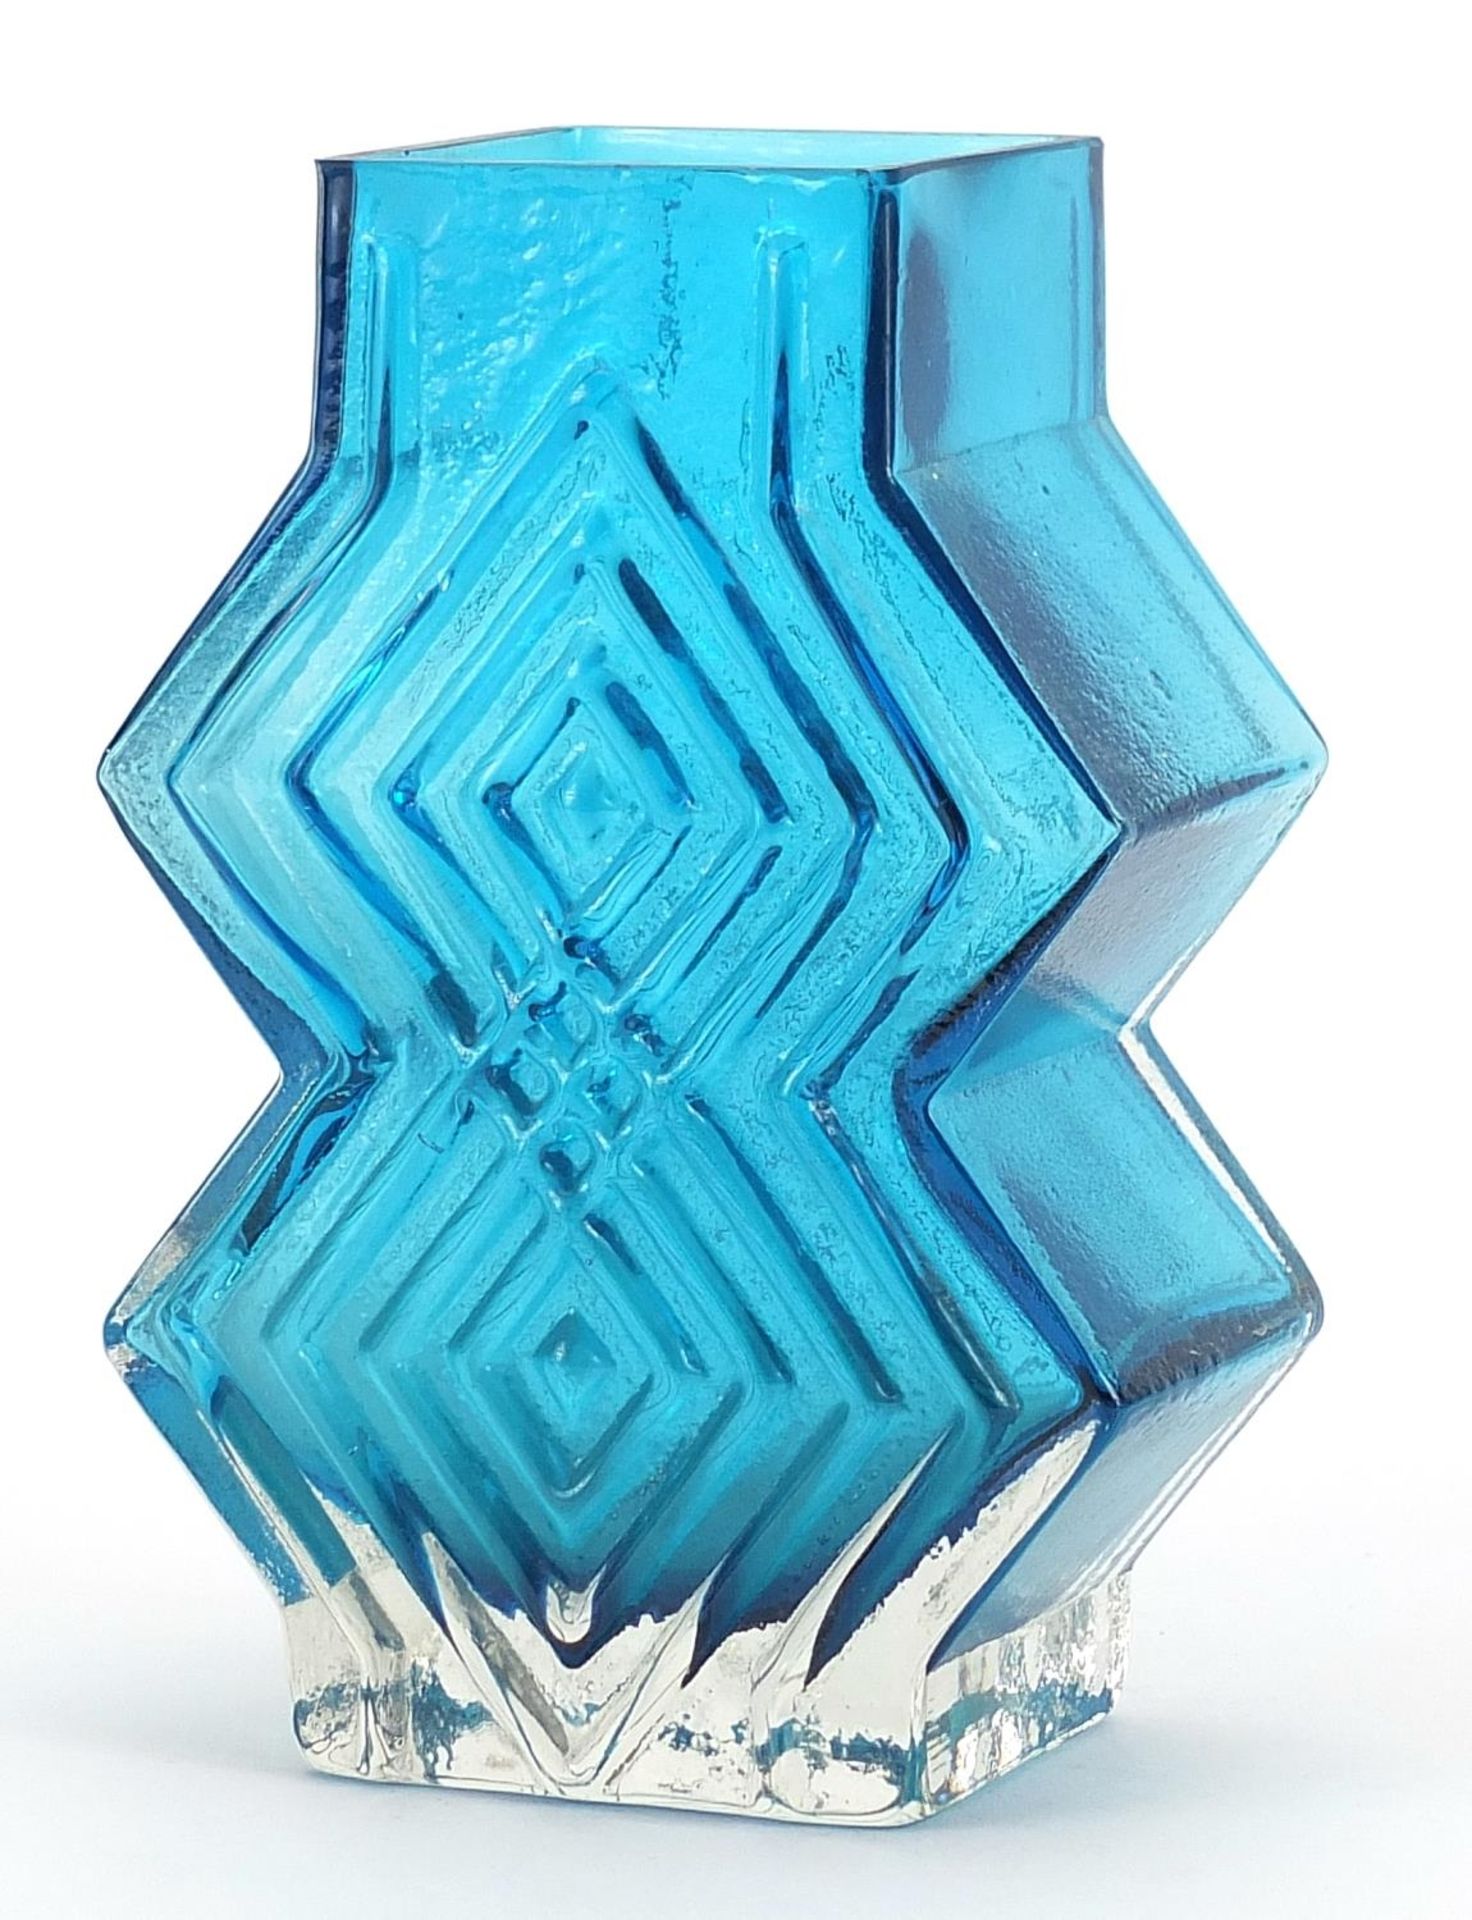 Geoffrey Baxter for Whitefriars, double diamond glass vase in kingfisher blue, 16cm high